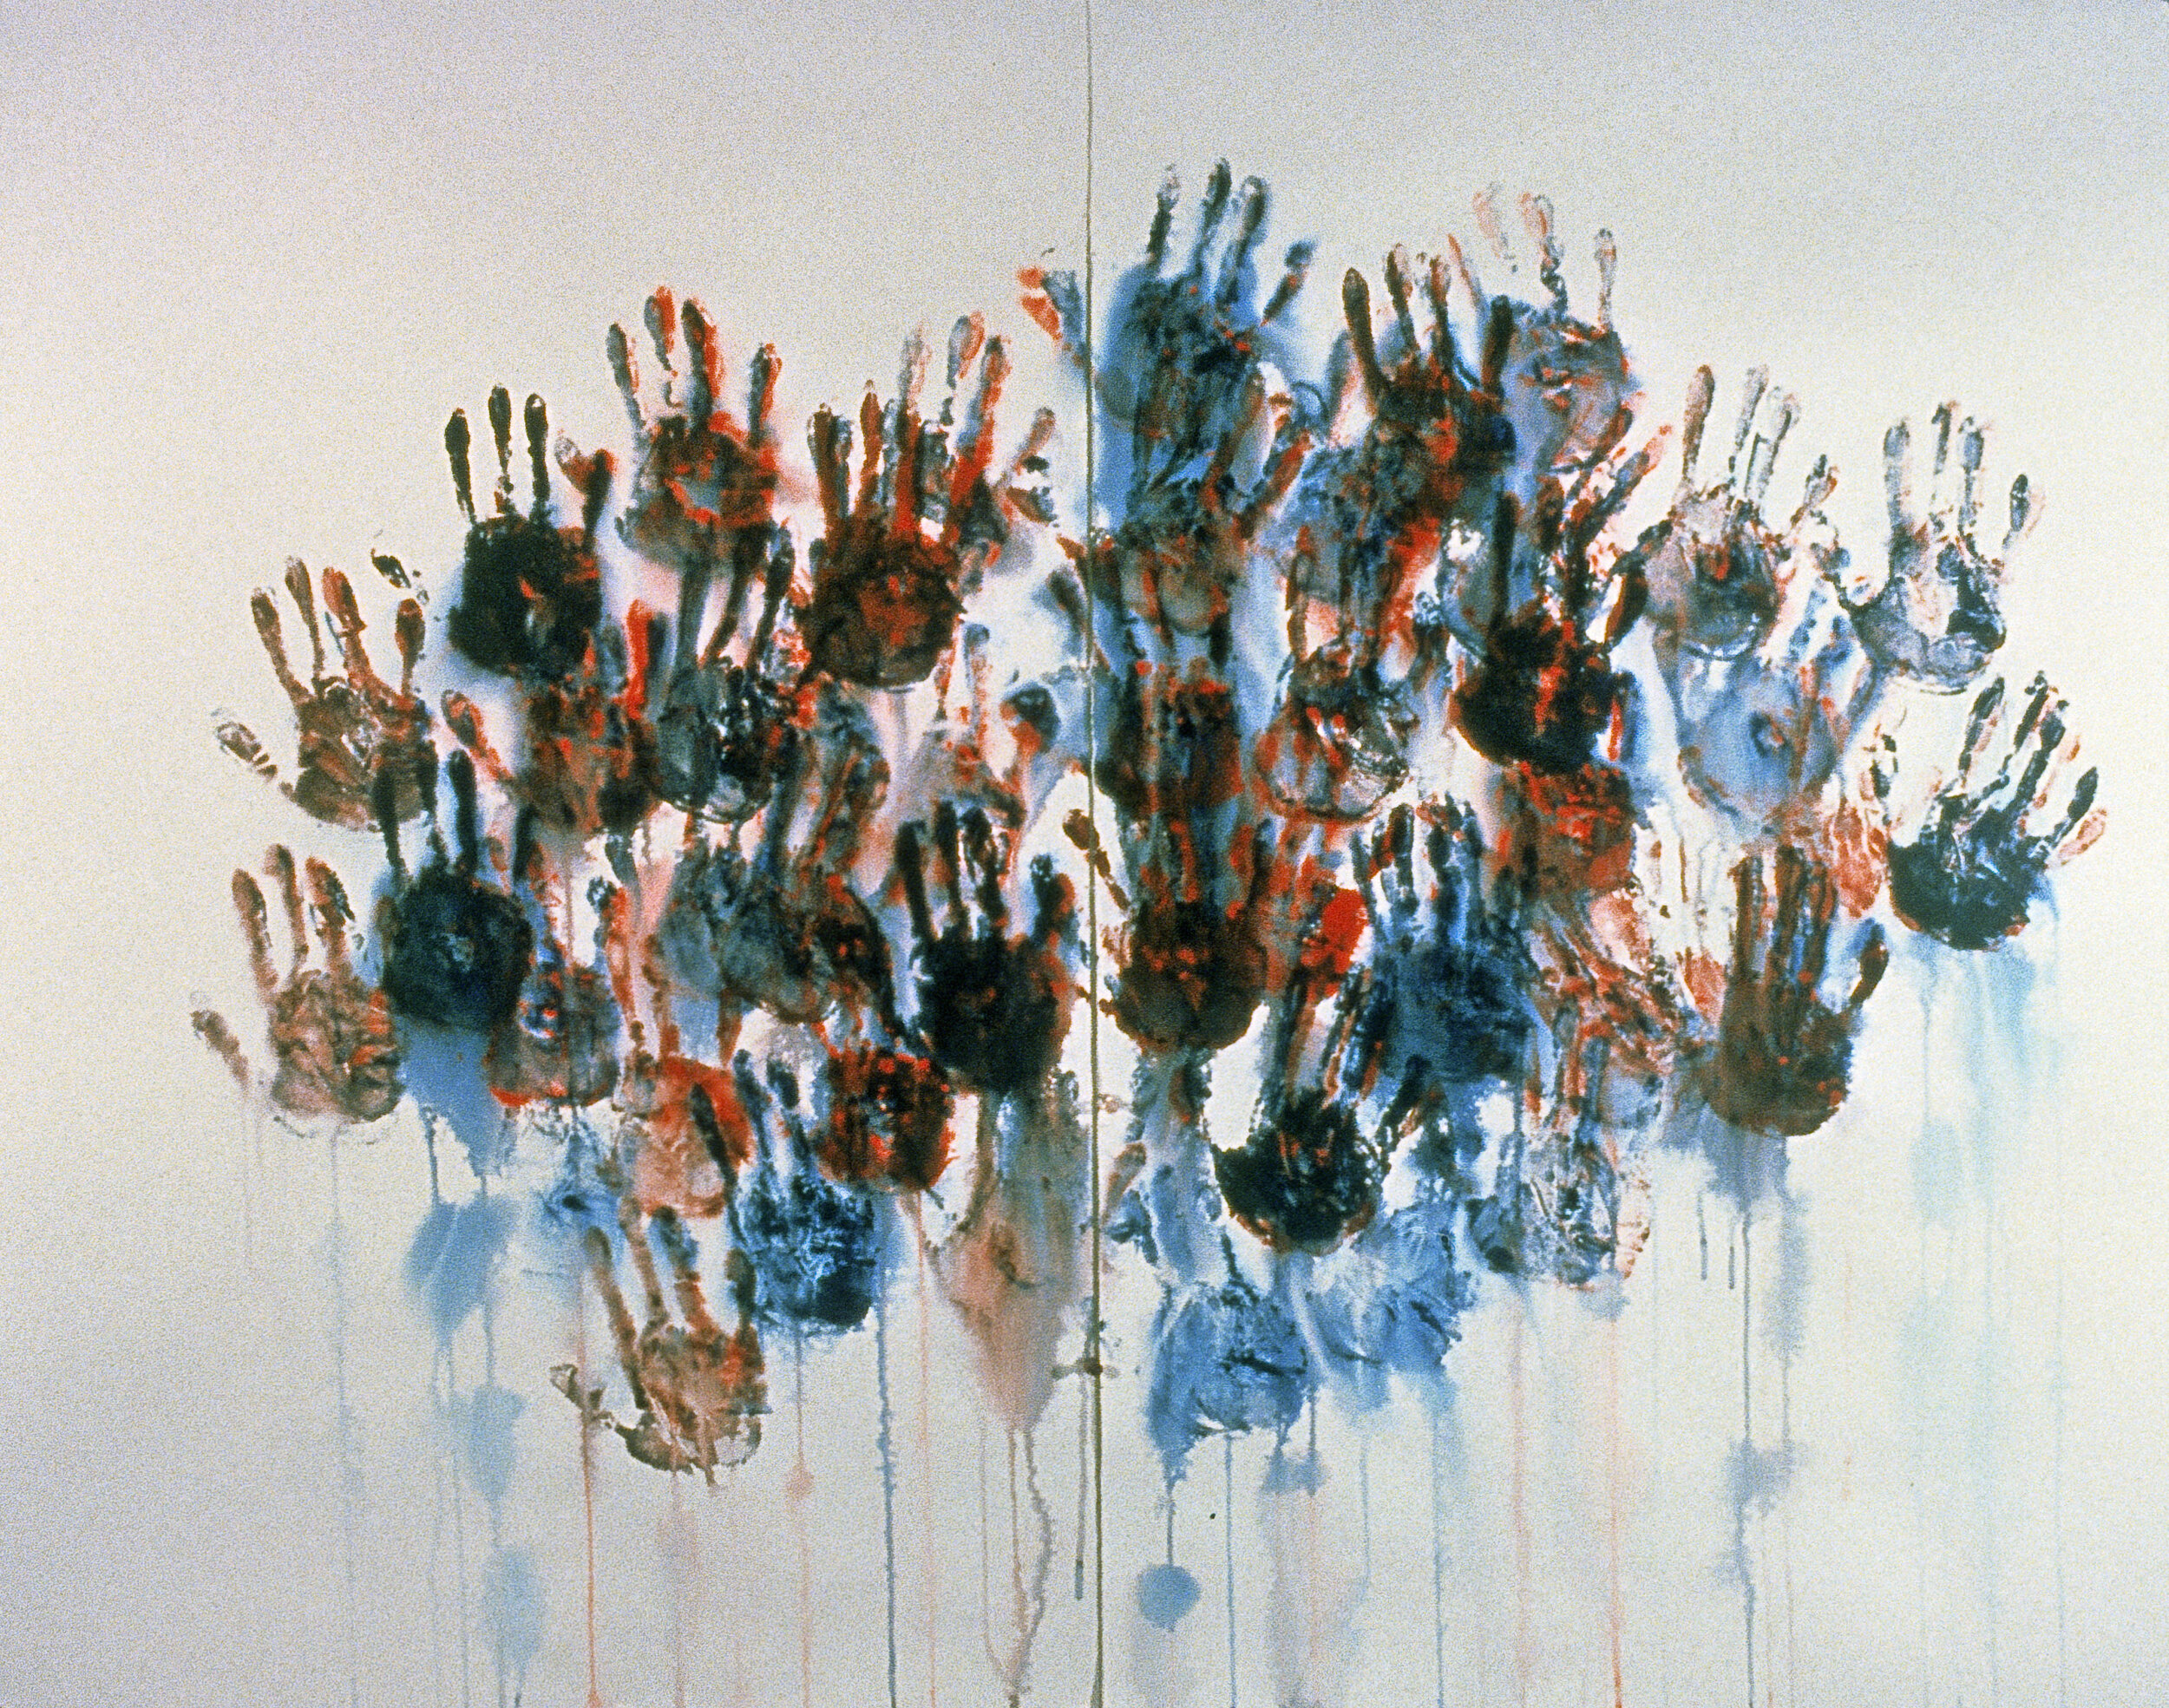   Cluster , 1994, acrylic on paper, 41 x 26 inches 